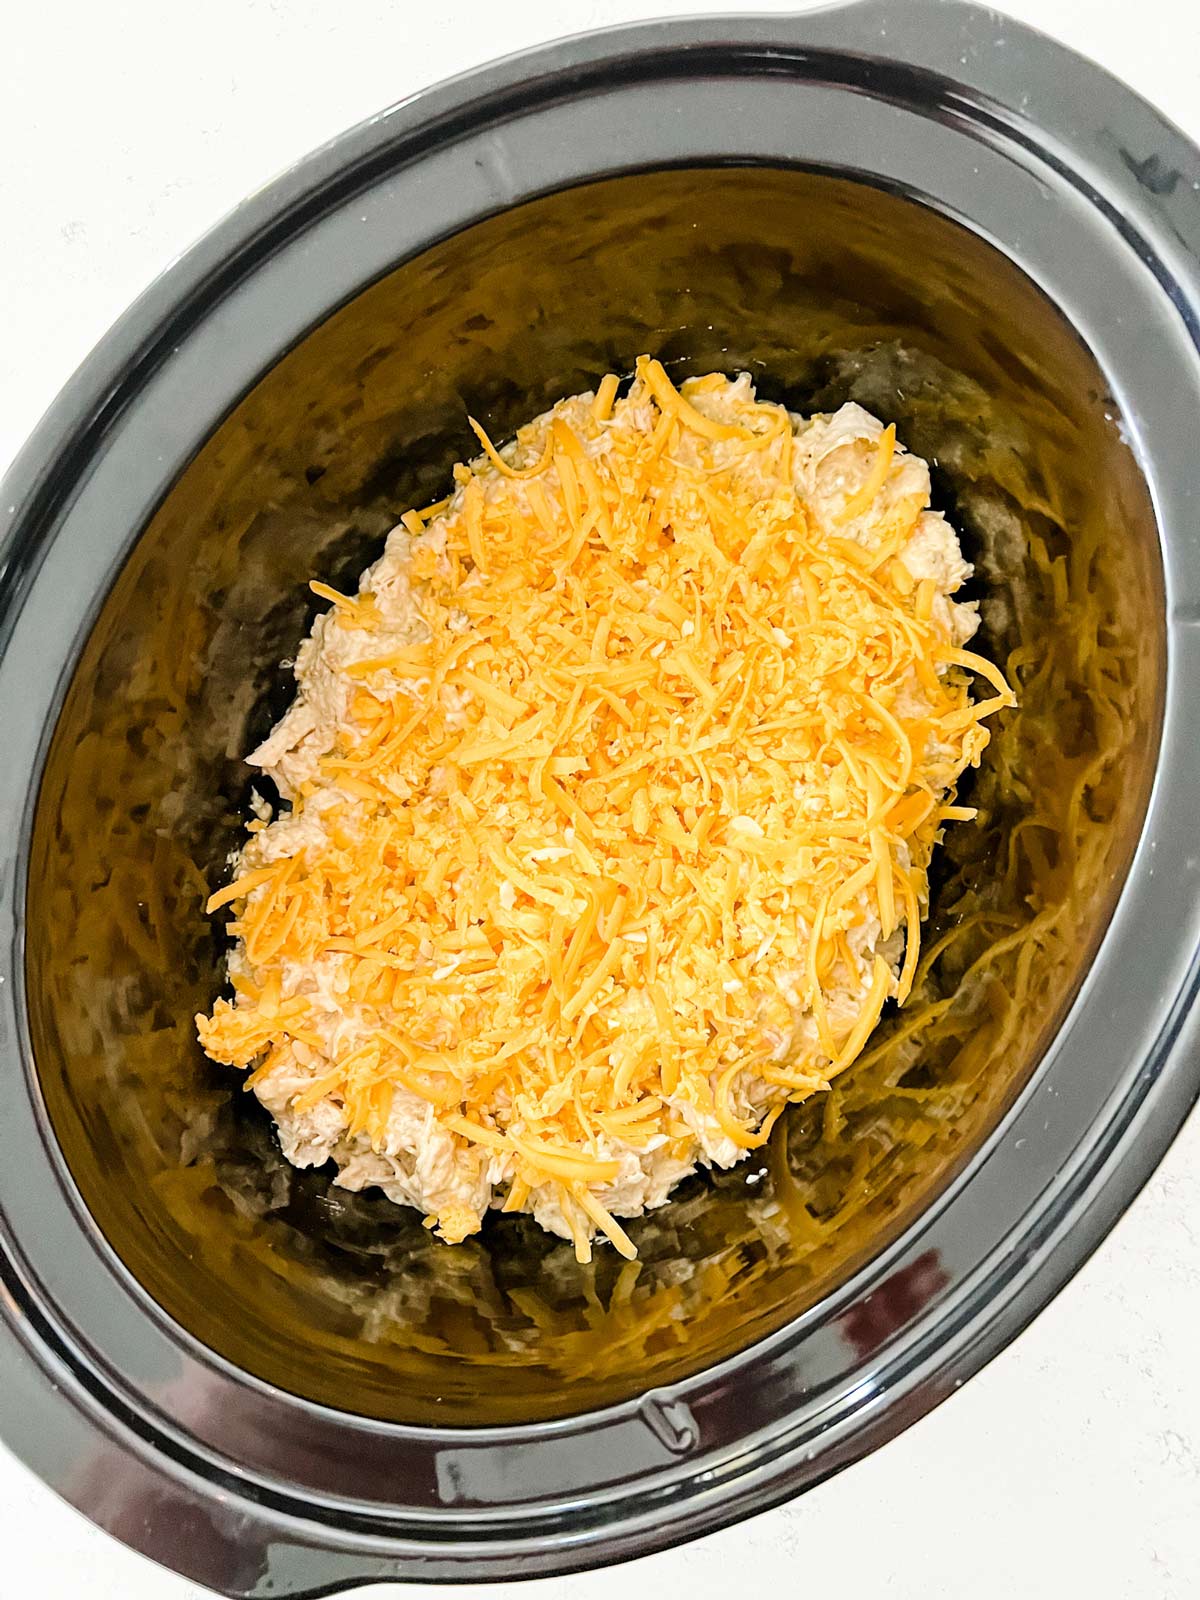 Ranch chicken in the crockpot with shredded cheese on it ready to melt.